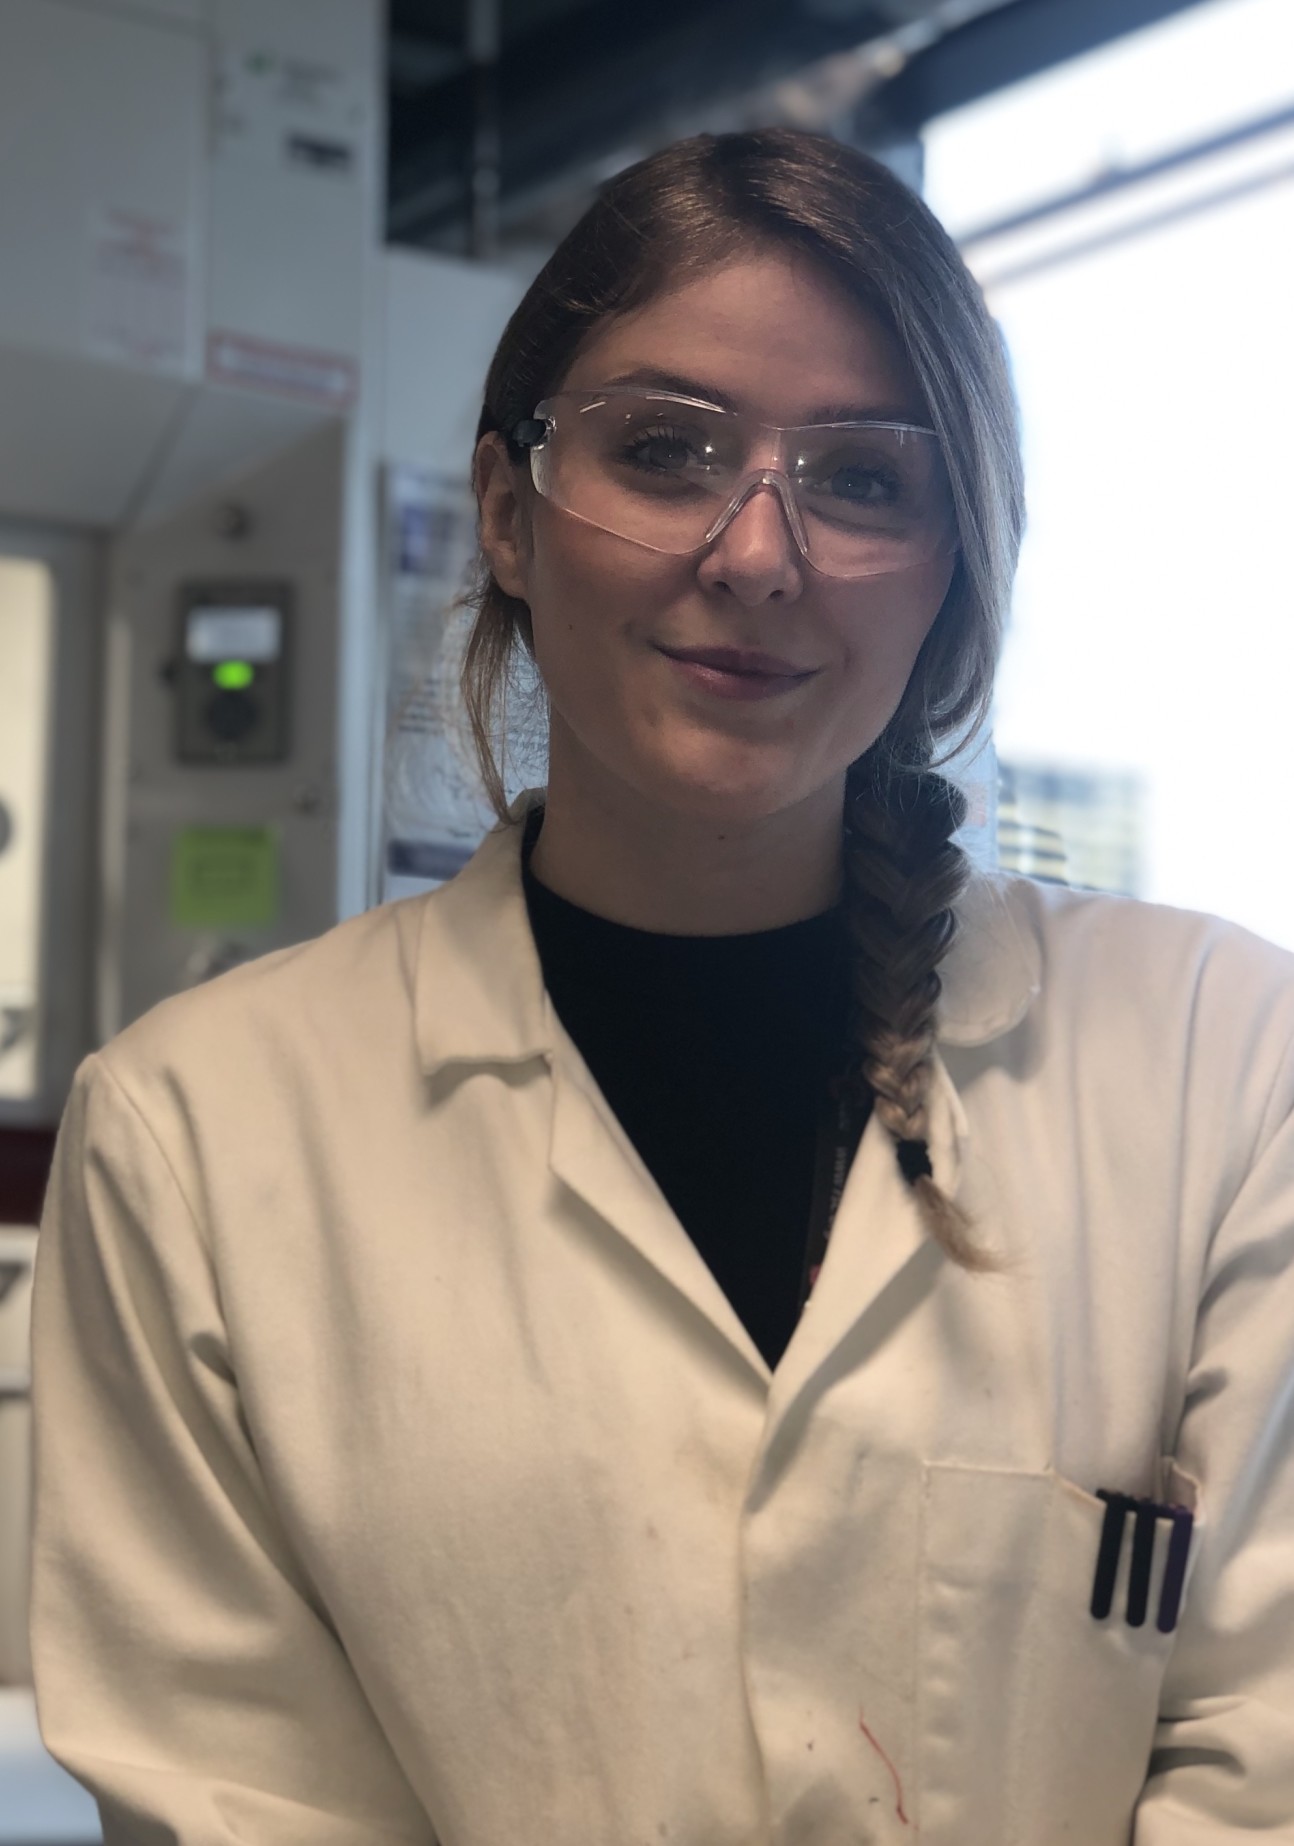 Woman in lab coat and safety goggles